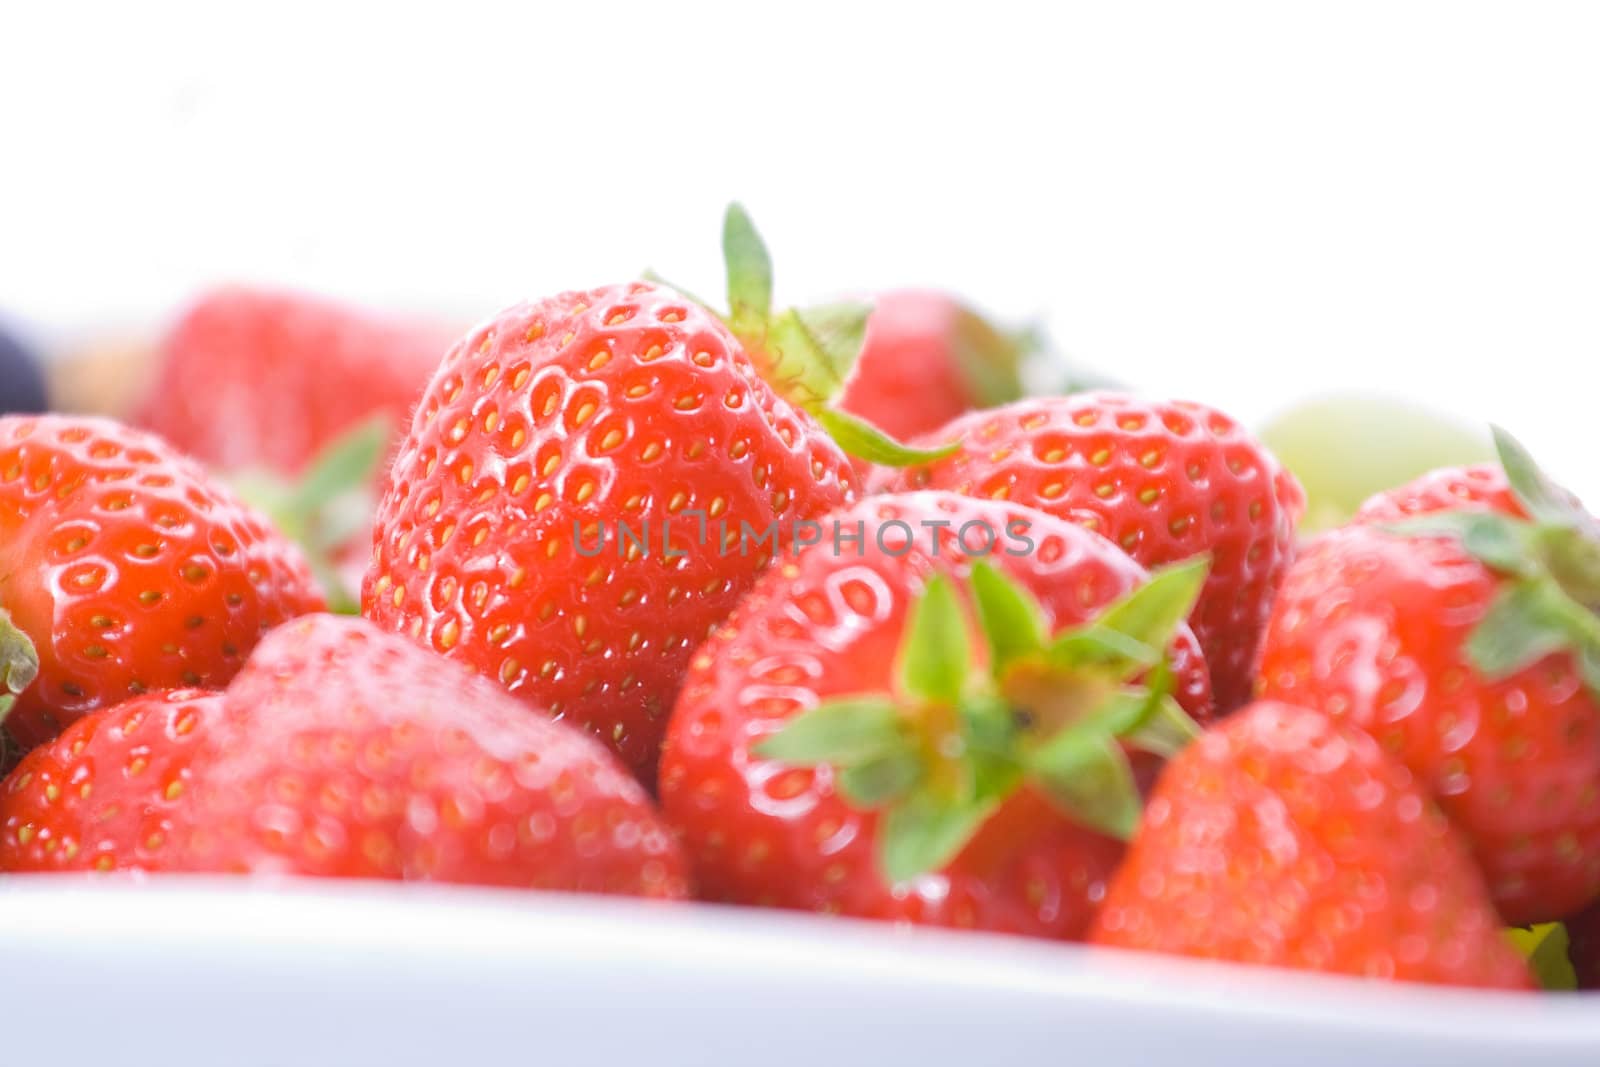 Delicious red strawberries on a plate with shallow depth of field.